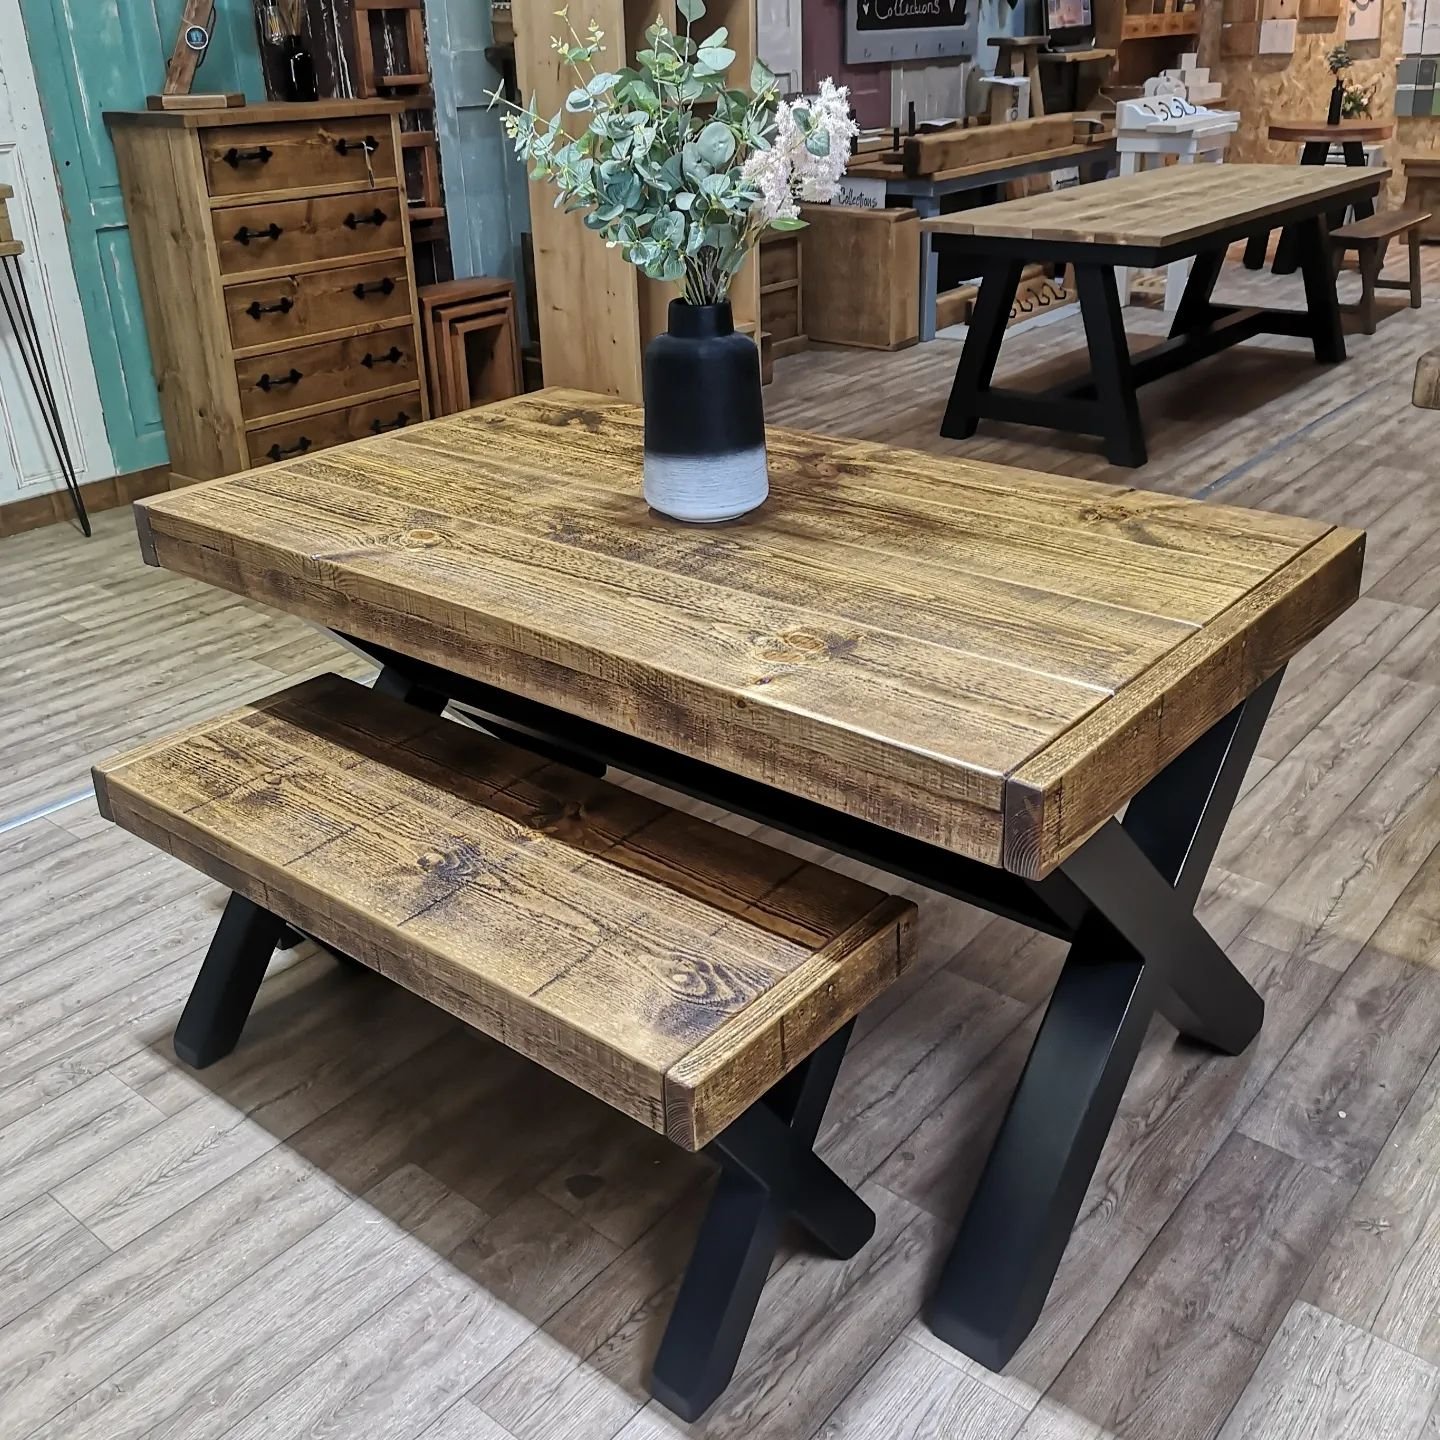 The Bolton Banquet with Bench in Dark Oak &amp; Pitch Black Solid

#diningroom #diningtable #diningbench #modernrusticdecor #cleanrustic #homestyling #homerenovation #handmade #rustichomedecor #rusticlove #rustichome #homesweethome #instahomewales #h